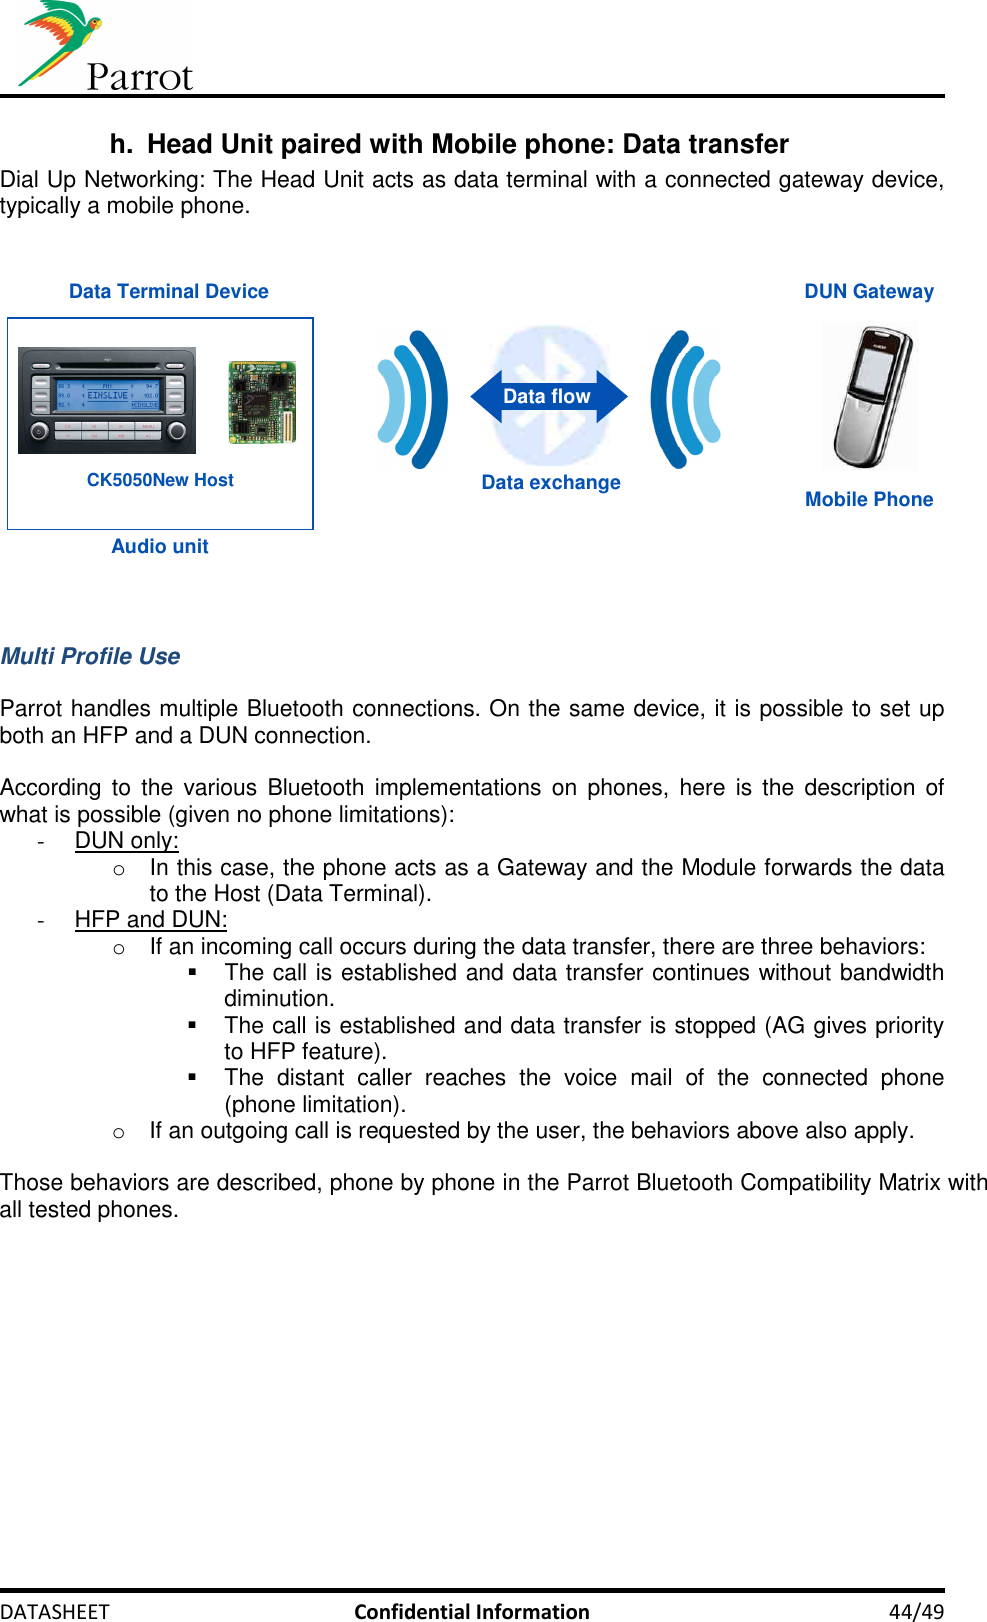     DATASHEET  Confidential Information  44/49 h.  Head Unit paired with Mobile phone: Data transfer Dial Up Networking: The Head Unit acts as data terminal with a connected gateway device, typically a mobile phone.    DUN Gateway Data Terminal DeviceMobile PhoneAudio unitCK5050New Host Data exchangeData flow   Multi Profile Use  Parrot handles multiple Bluetooth connections. On the same device, it is possible to set up both an HFP and a DUN connection.  According  to  the  various  Bluetooth  implementations  on  phones,  here  is  the  description of what is possible (given no phone limitations): -  DUN only:  o  In this case, the phone acts as a Gateway and the Module forwards the data to the Host (Data Terminal). -  HFP and DUN: o  If an incoming call occurs during the data transfer, there are three behaviors:    The call is established and data transfer continues without bandwidth diminution.   The call is established and data transfer is stopped (AG gives priority to HFP feature).   The  distant  caller  reaches  the  voice  mail  of  the  connected  phone (phone limitation). o  If an outgoing call is requested by the user, the behaviors above also apply.  Those behaviors are described, phone by phone in the Parrot Bluetooth Compatibility Matrix with all tested phones.  